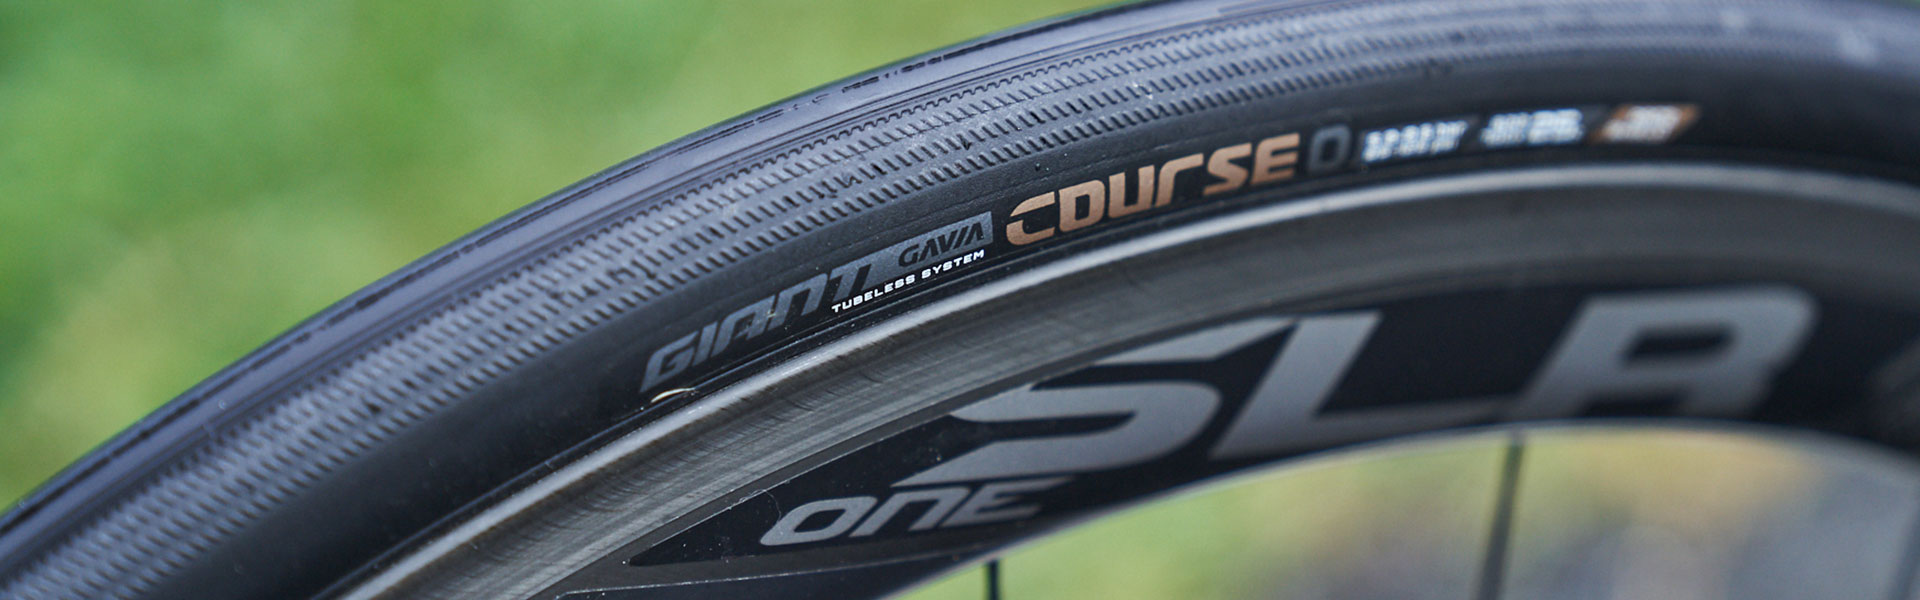 Gavia Tubeless Tires | Giant Bicycles US